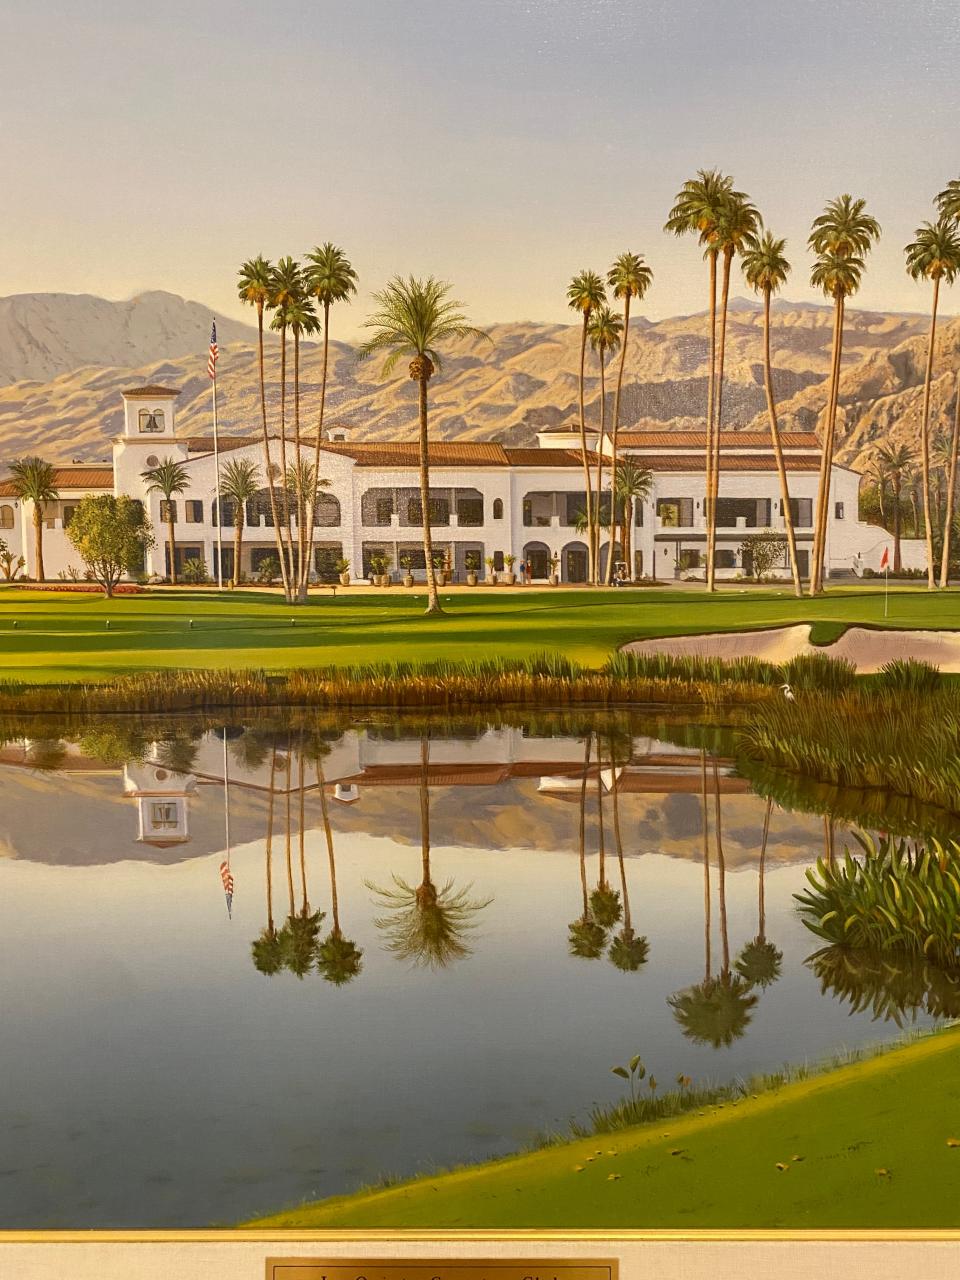 The 2024 Quinn Brady Memorial Swing Against Cancer will take place at La Quinta Country Club on April 8, 2024.